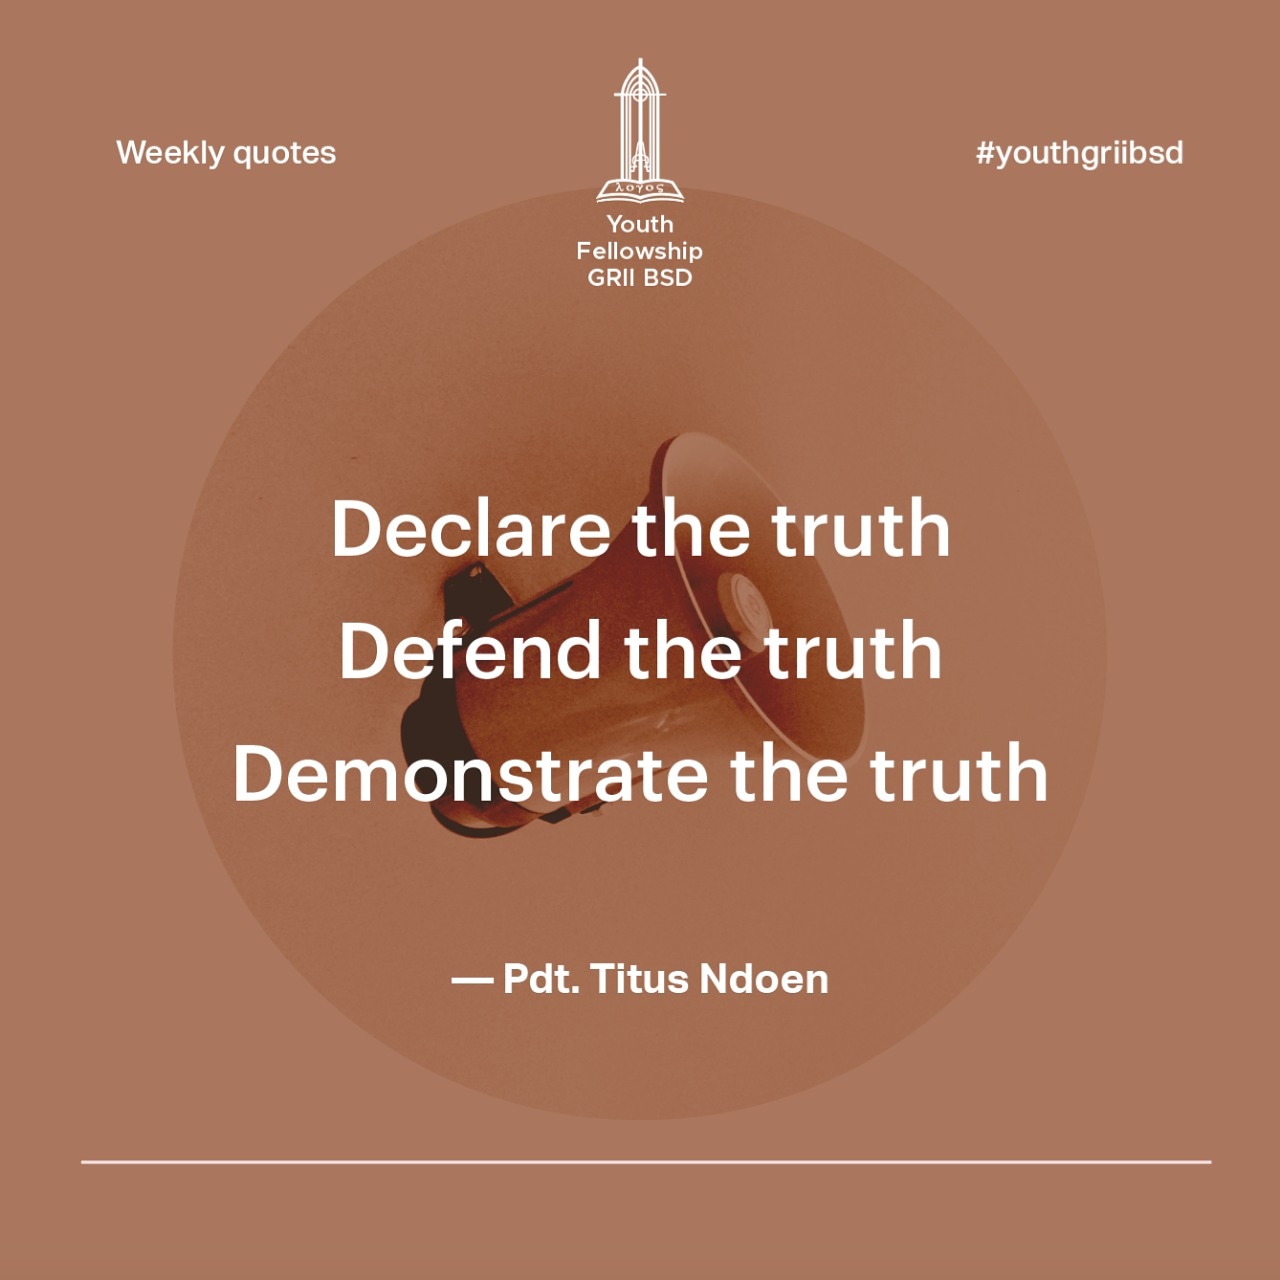 Declare the truth, Defend the truth, Demonstrate the truth.